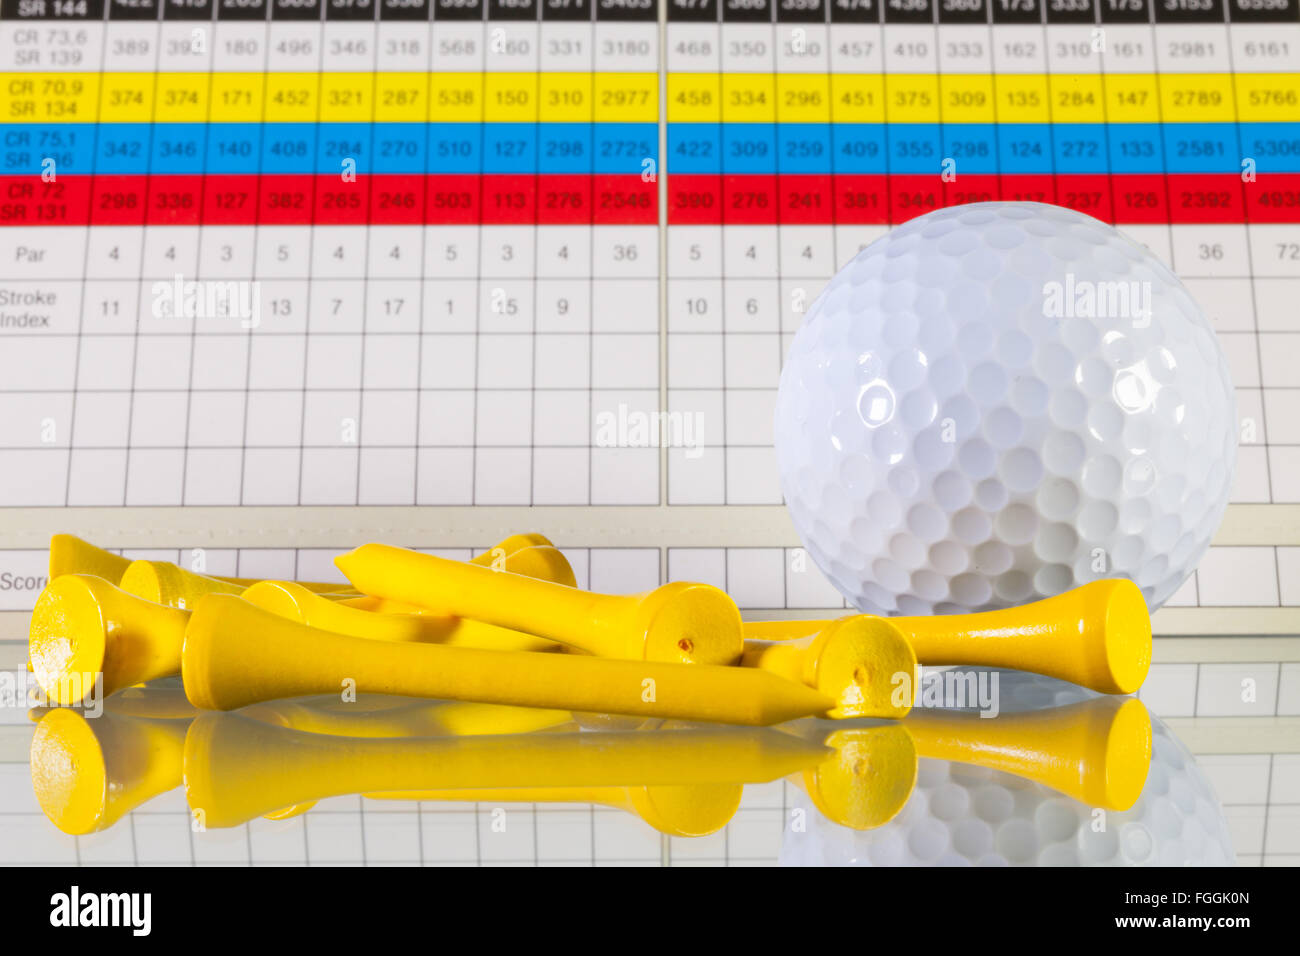 Golf score card and white ball on a glass table Stock Photo